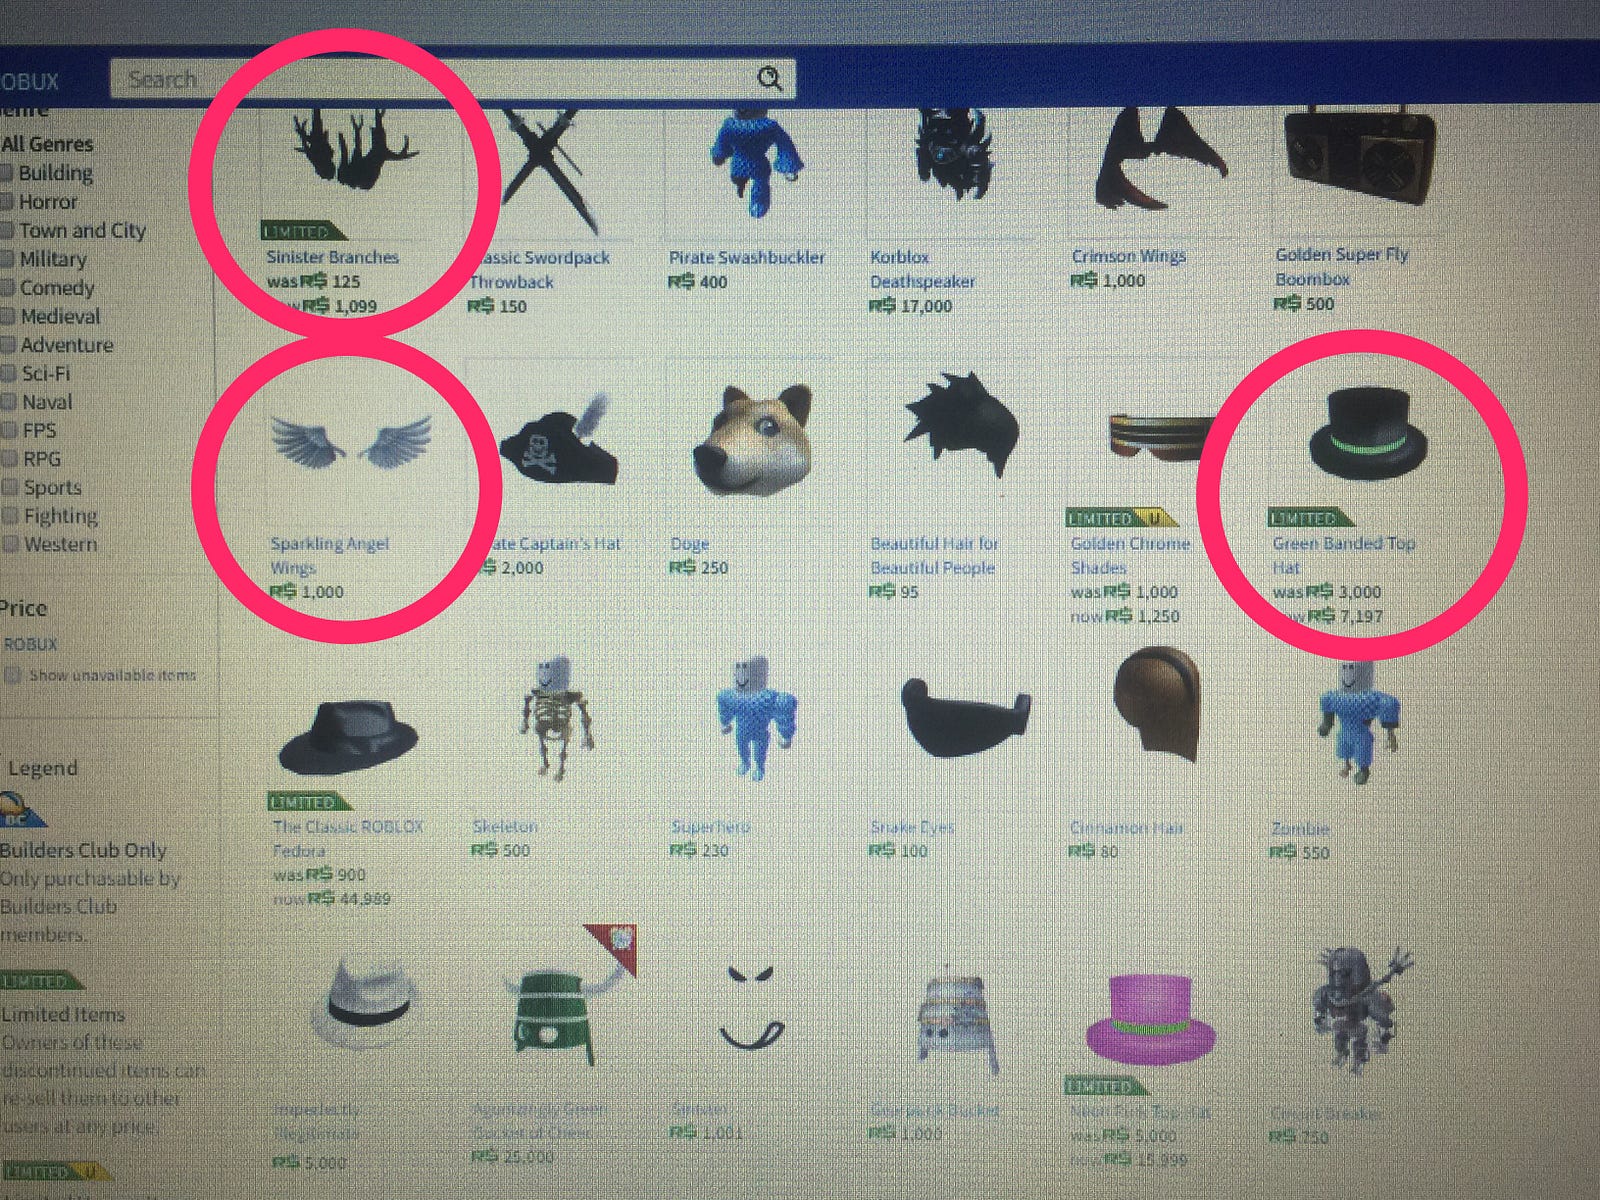 They Re Making Millions Jack Medium - well that s about 9 000 in robux do the math i m no mathematician so for those 3 items it s going to cost roughly between 80 for a club member and